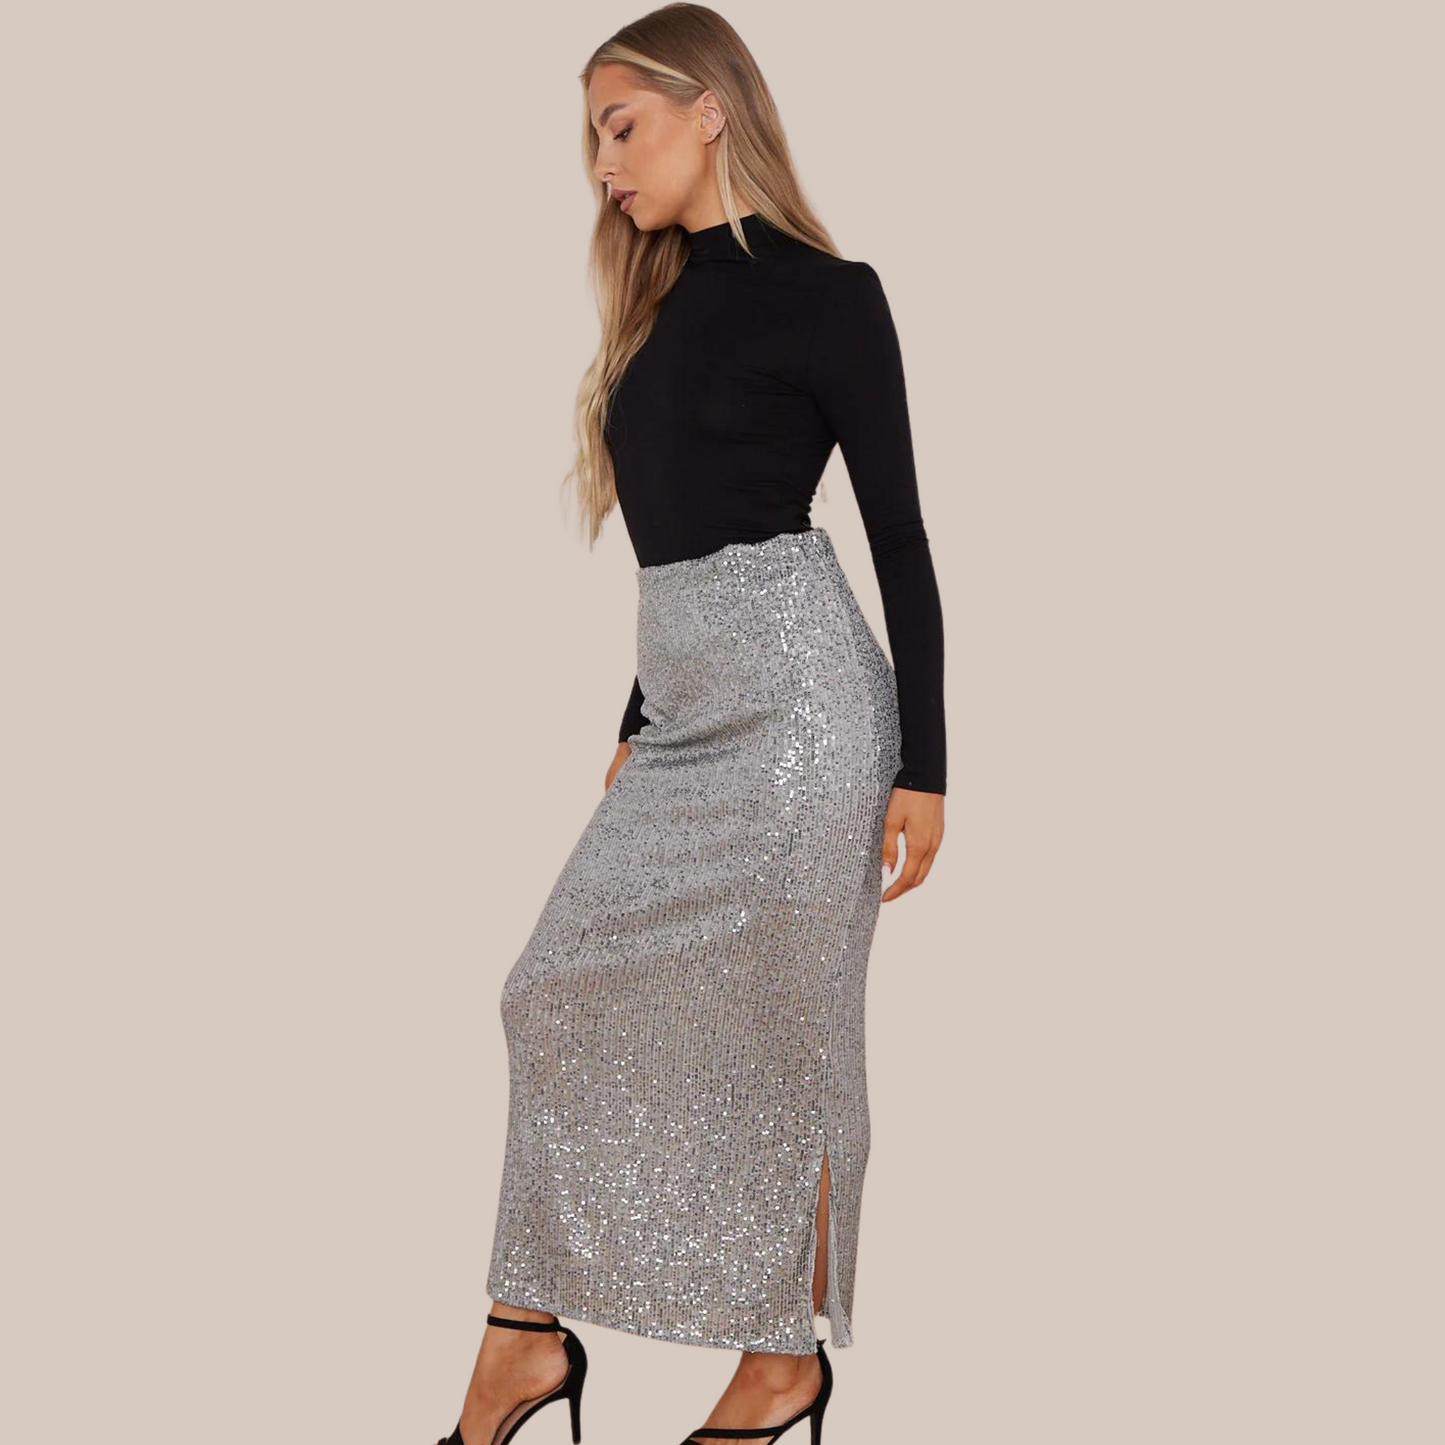 Alexia sequin skirt .Also available in silver. – The Daisy Bee Boutique